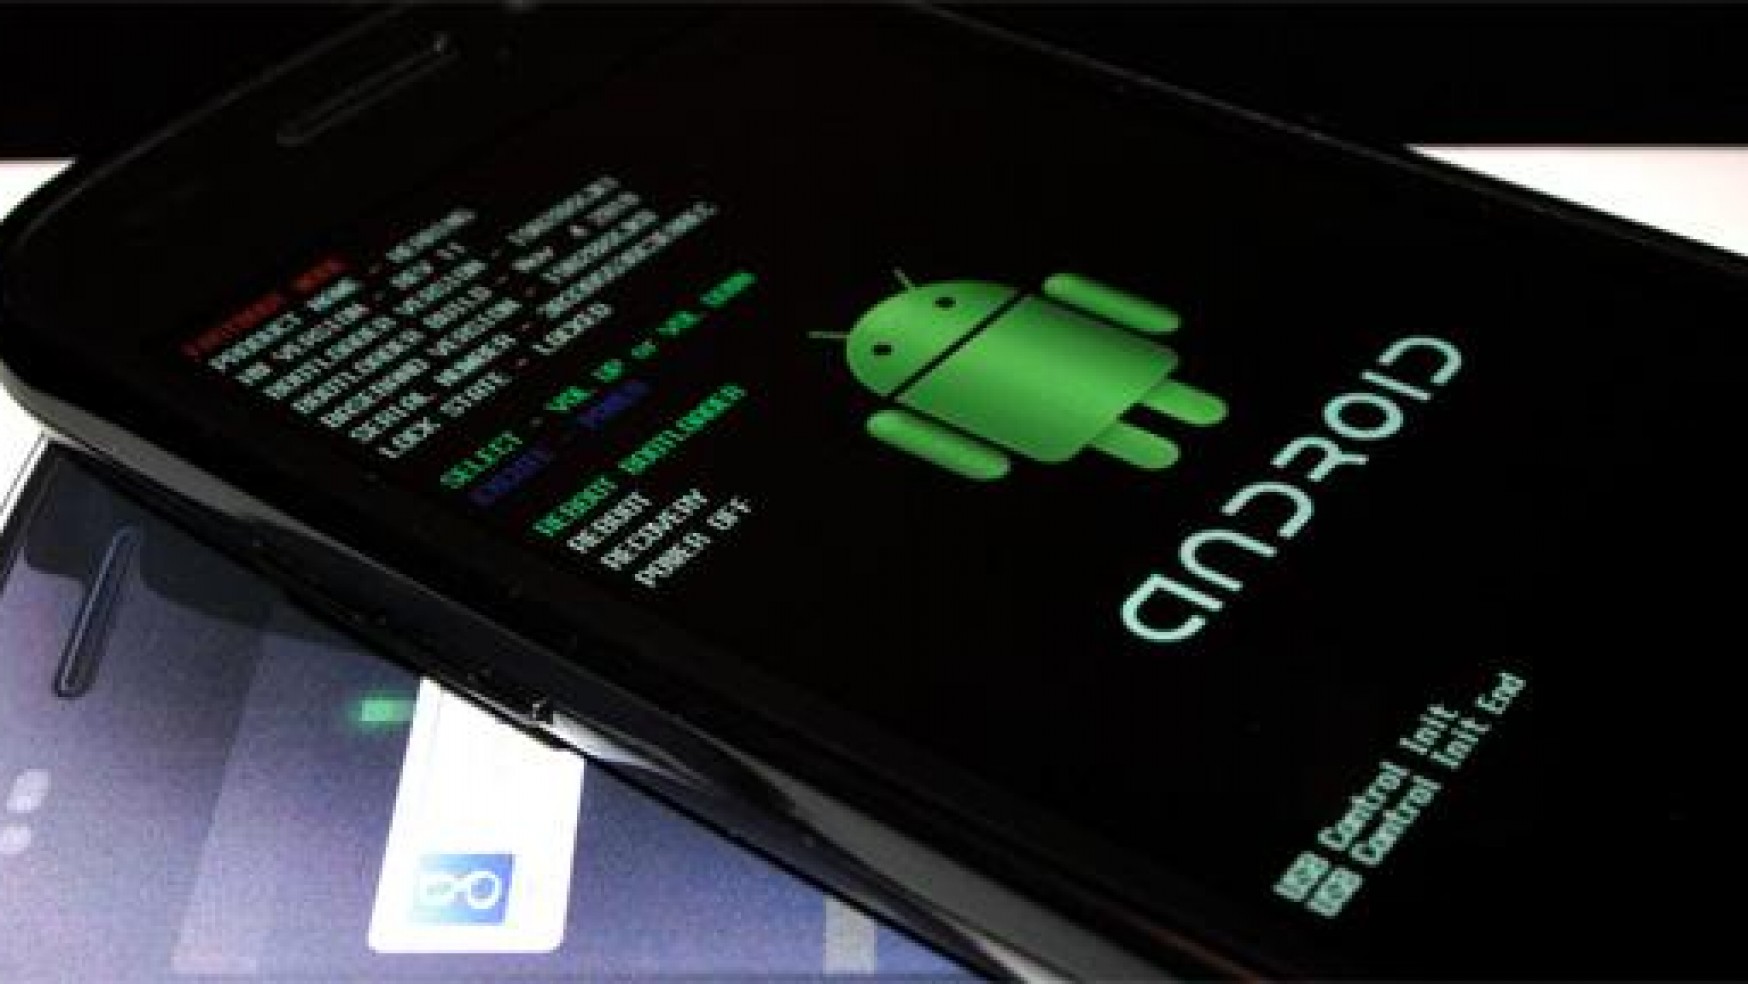 Bootloader android free download